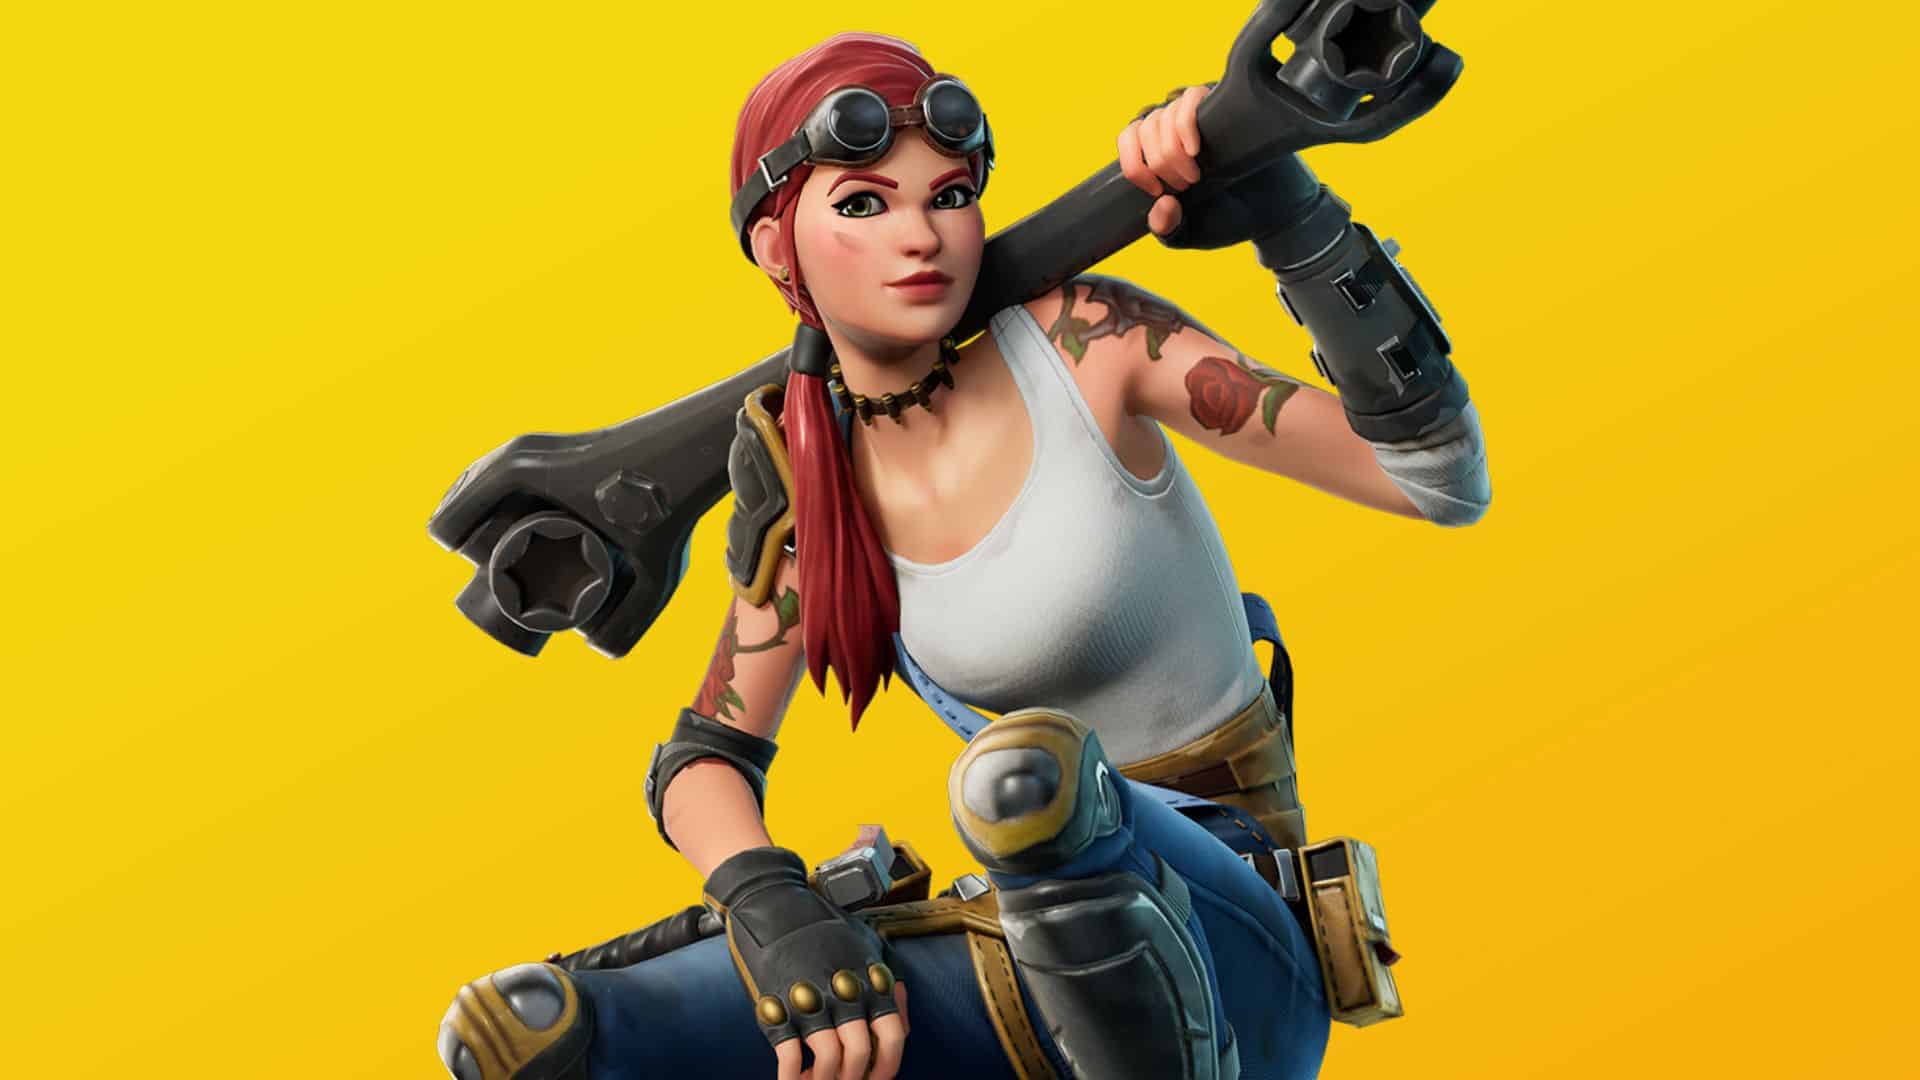 Leaked Fortnite skin reveals return of beloved collaboration from the past